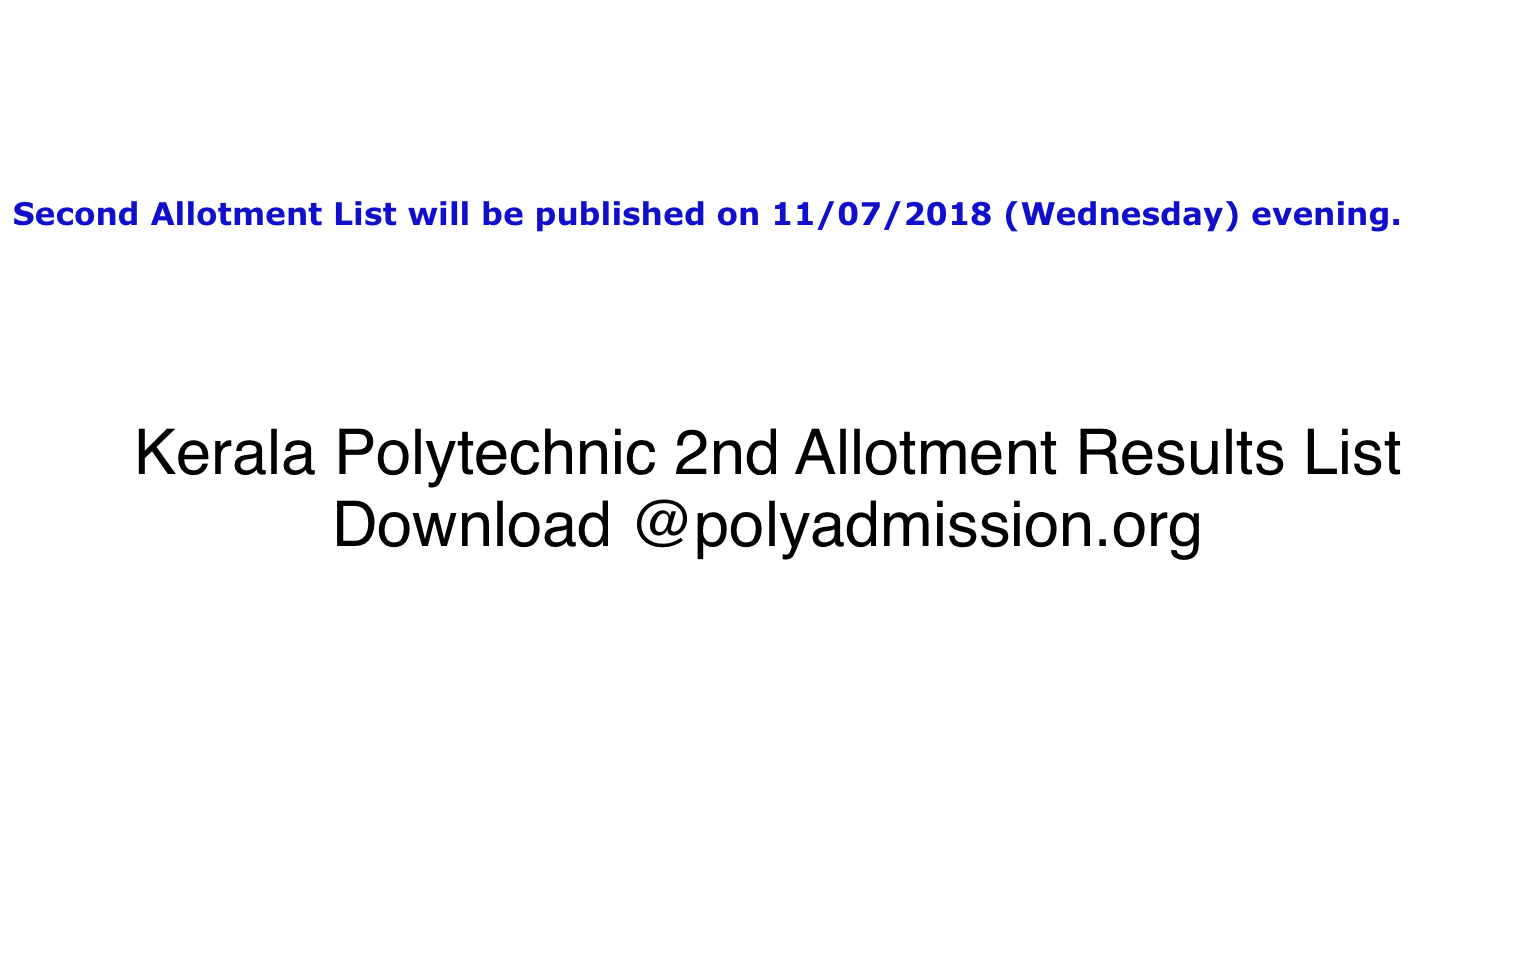 Kerala Polytechnic 2nd Allotment Results List Download @polyadmission.org